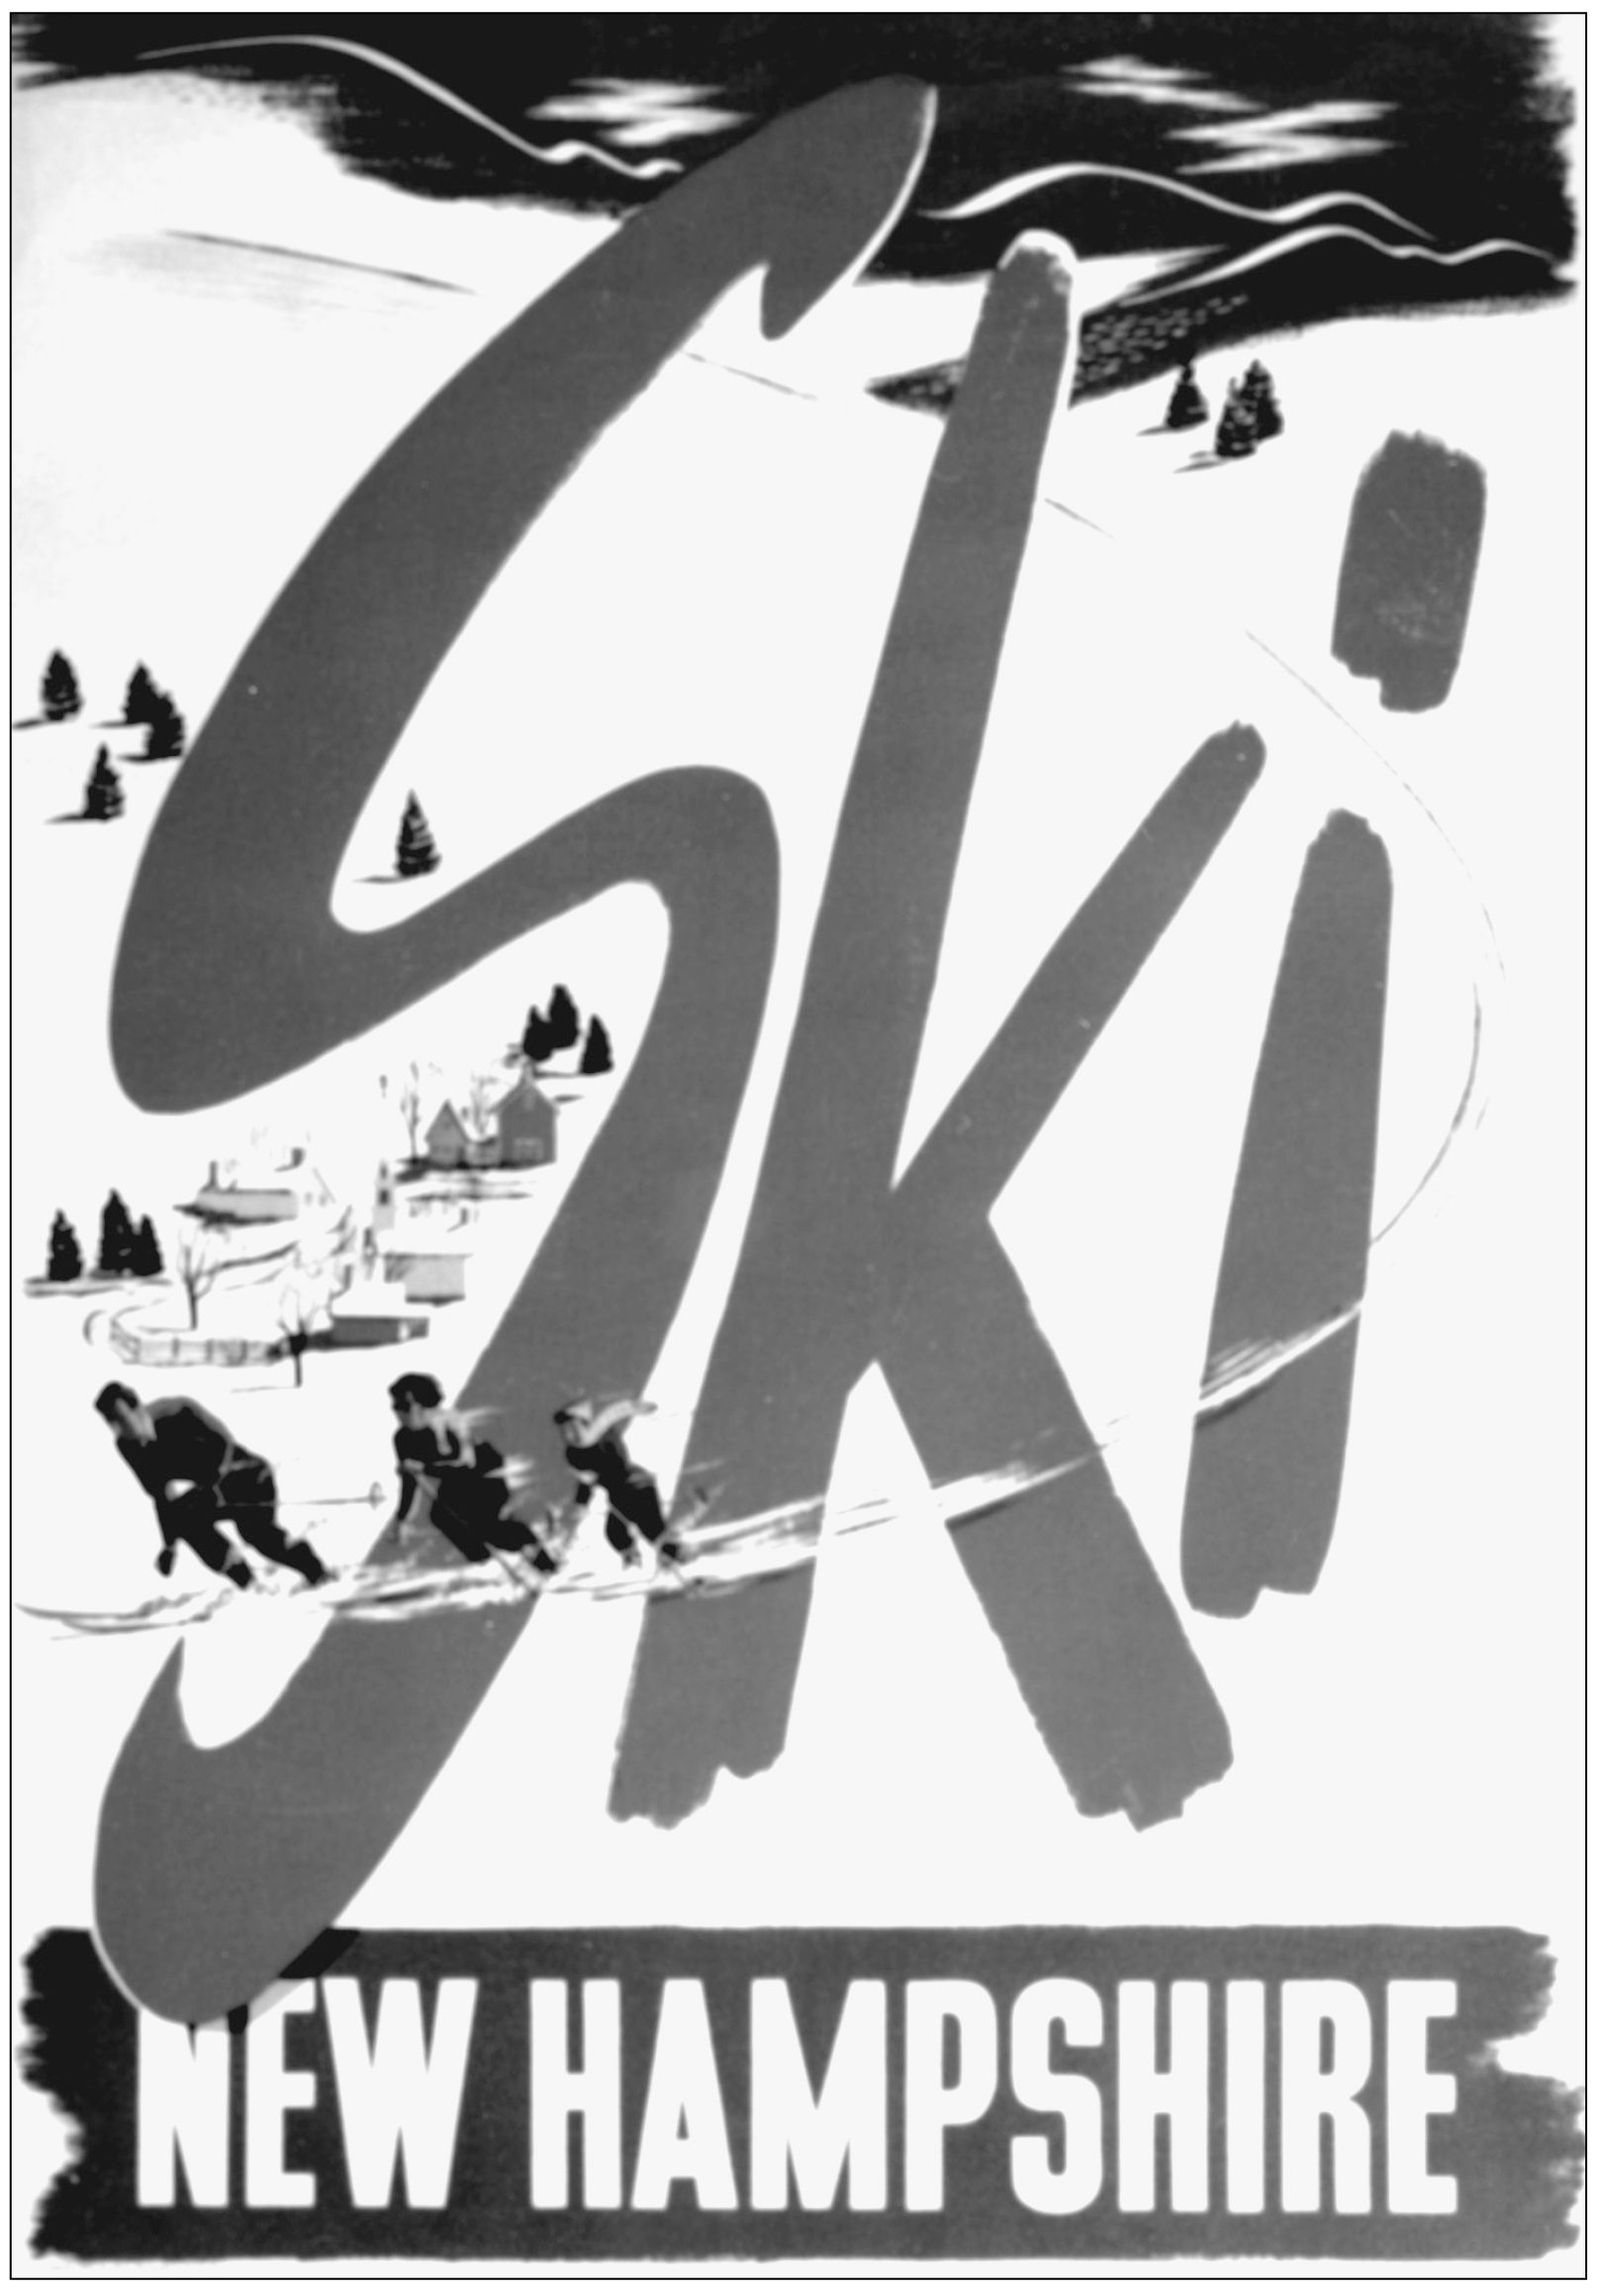 After the war family skiing was promoted The poster indicates the - photo 16